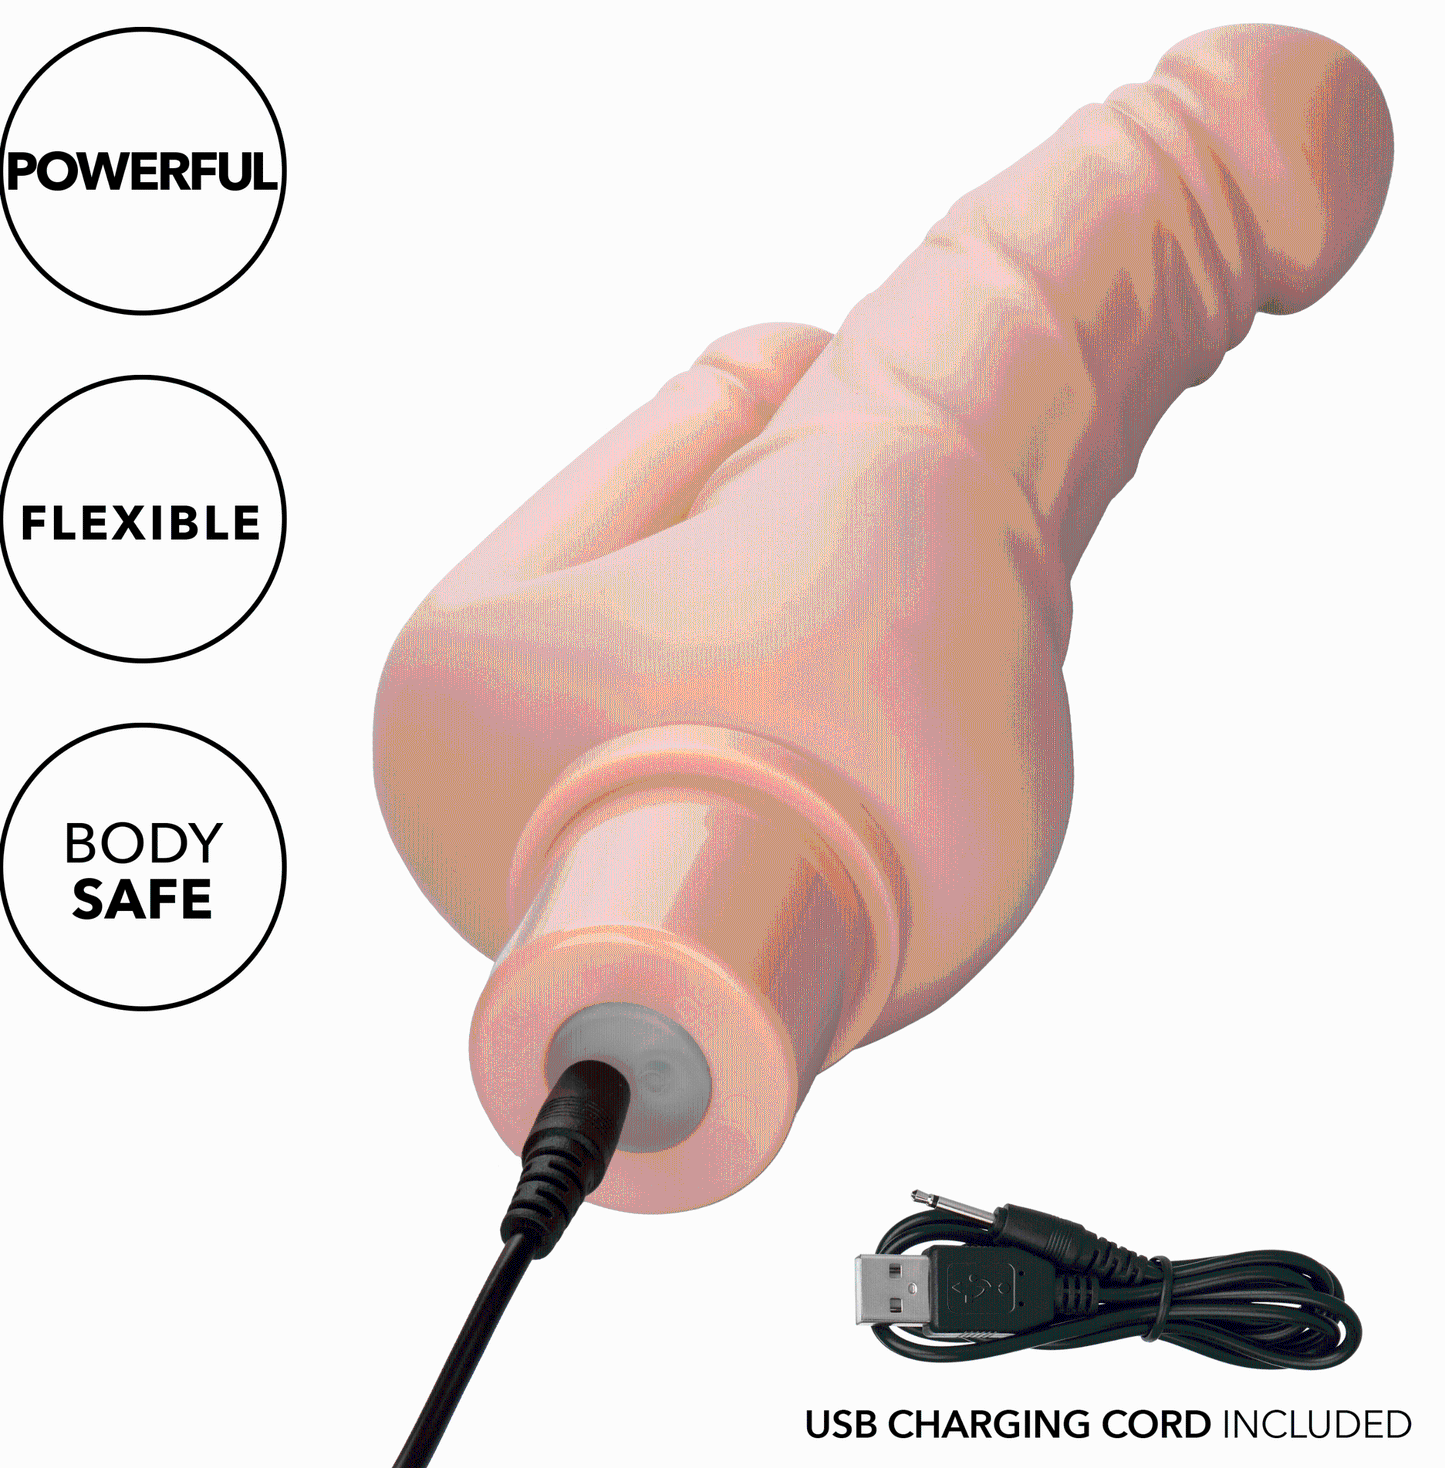 Rechargeable Power Stud Over and Under